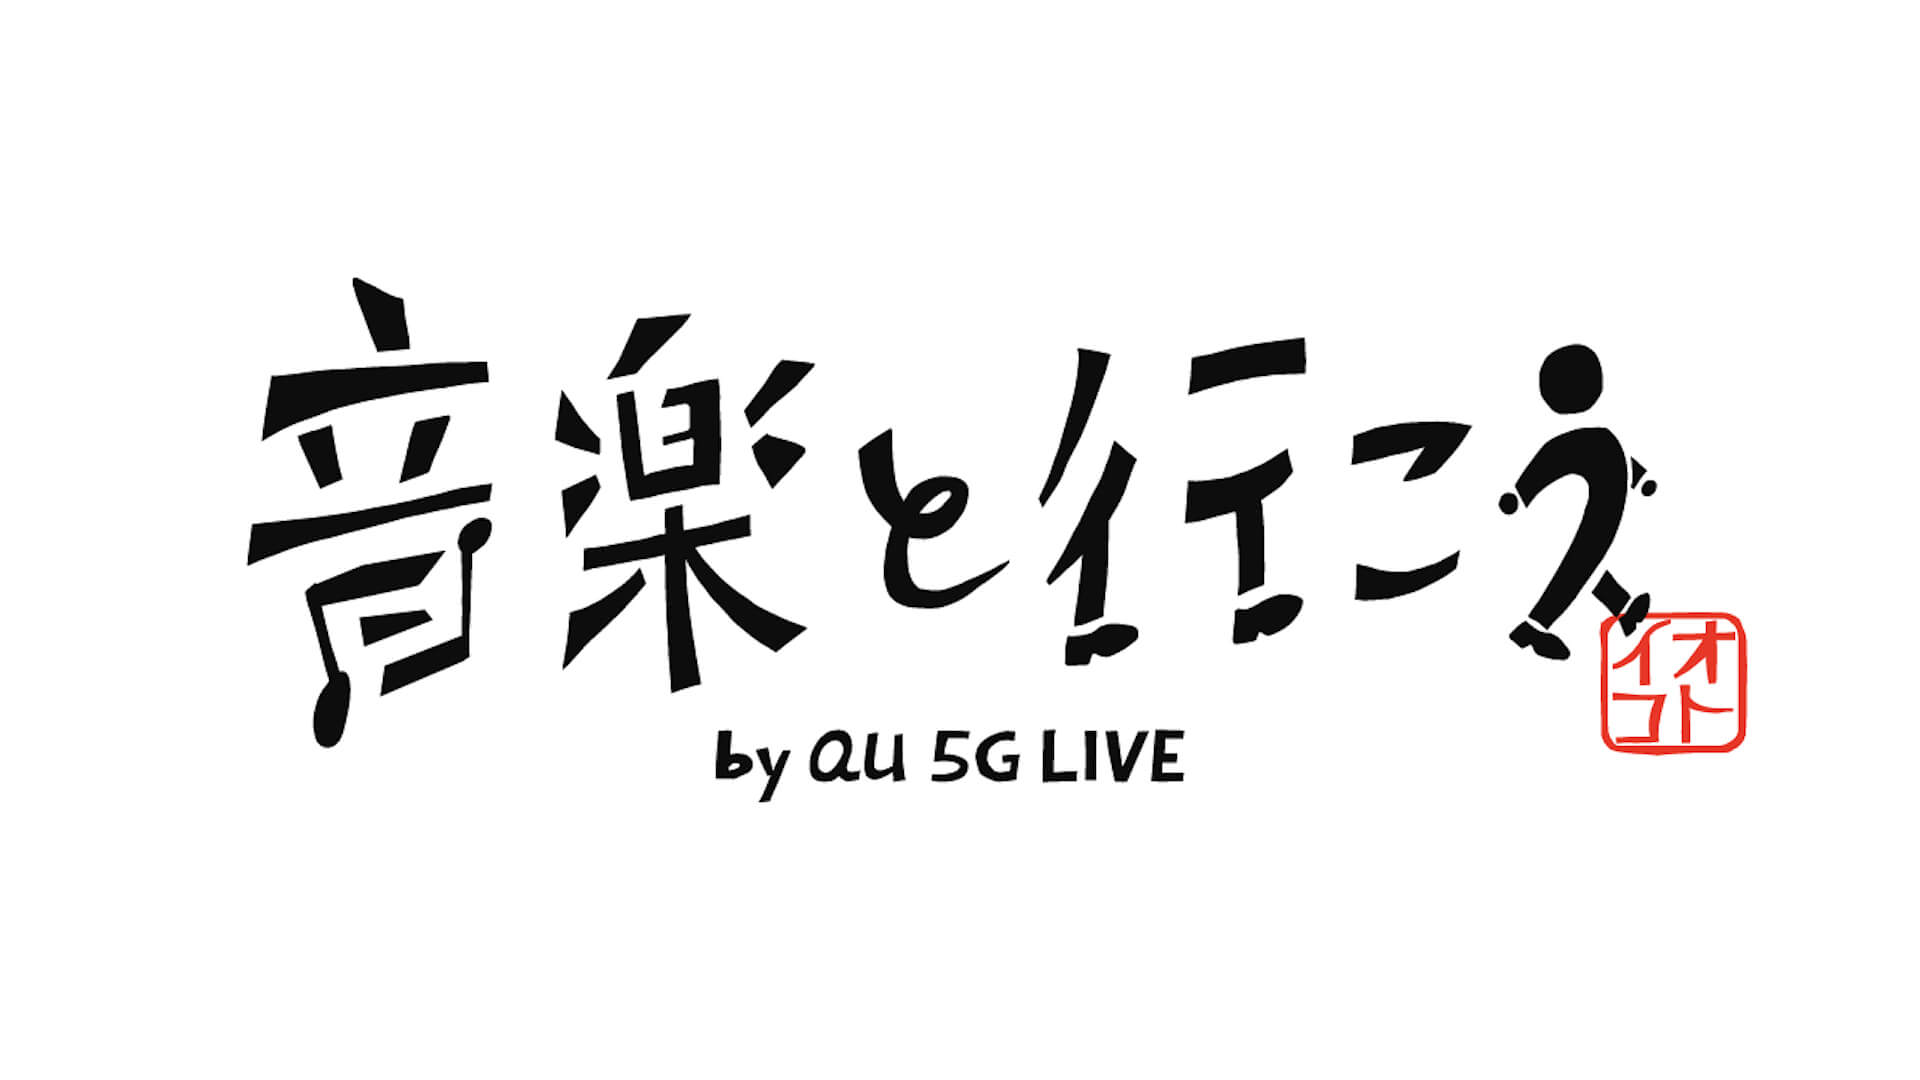 UNISON SQUARE GARDEN、MAN WITH A MISSIONが出演！地域貢献に繋がる音楽ライブ＜音楽と行こう by au 5G LIVE＞の開催迫る！ music220318_live-ongakutoikou-01